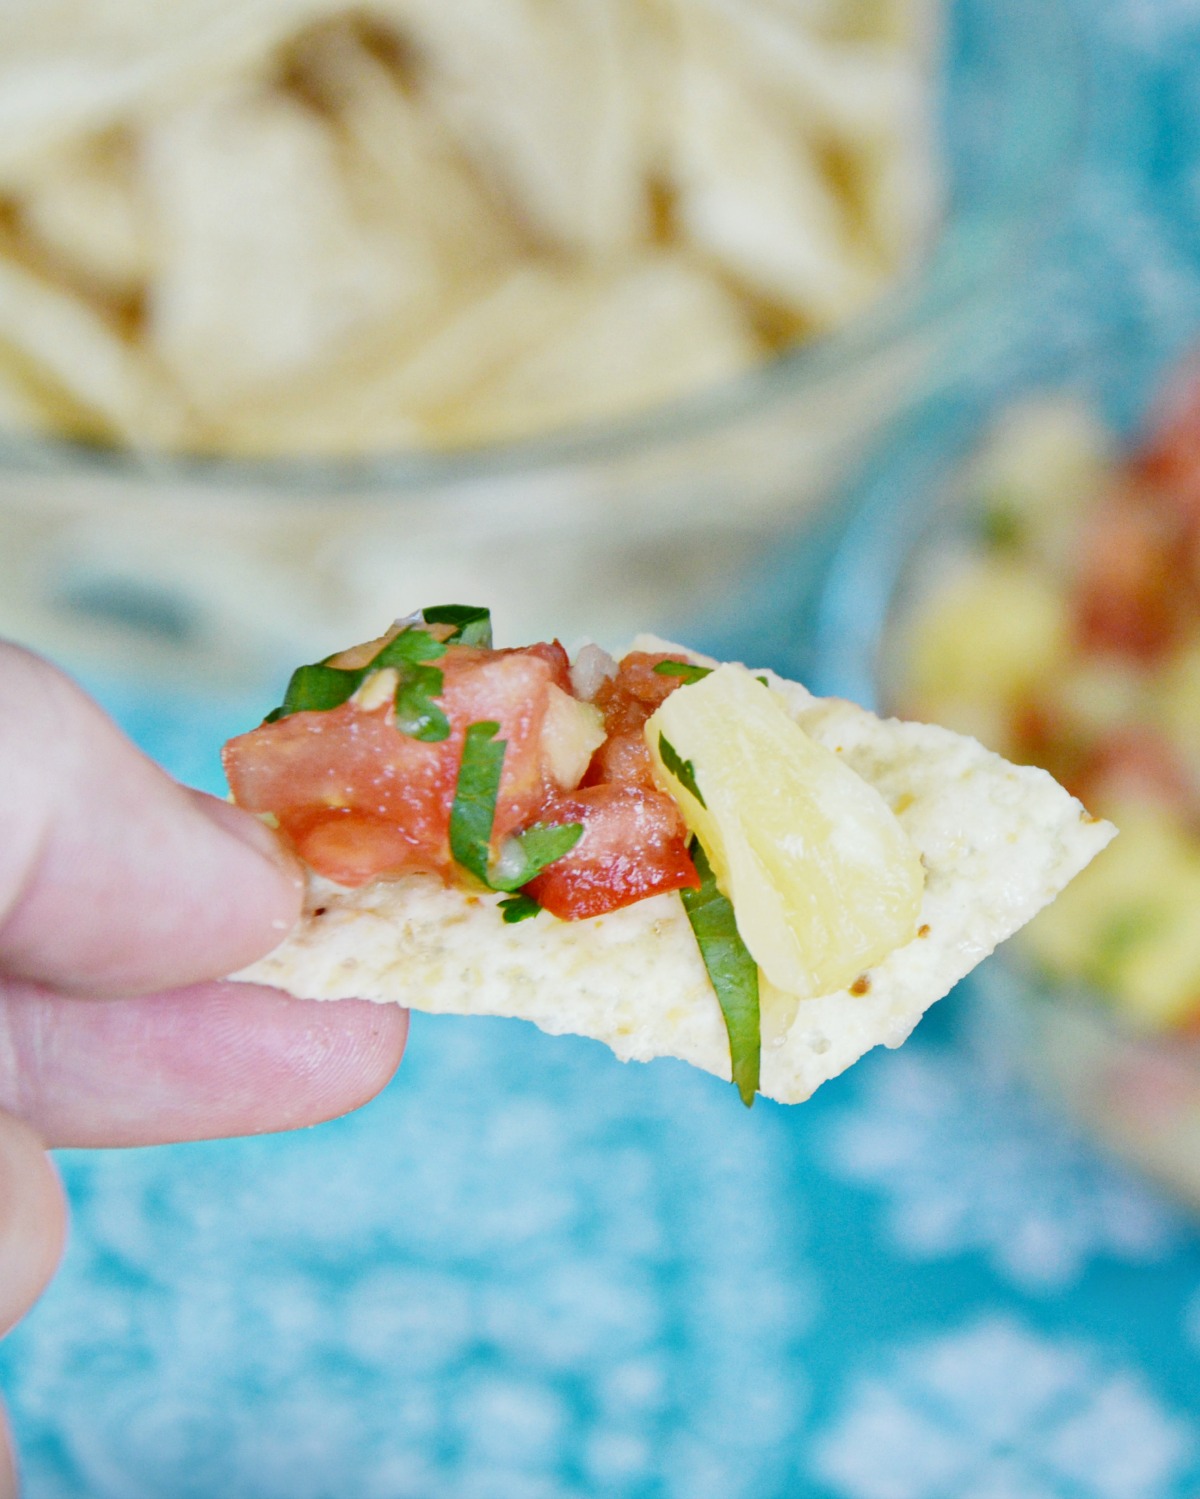 This pineapple salsa is so easy to make and delicious on chips and veggies.